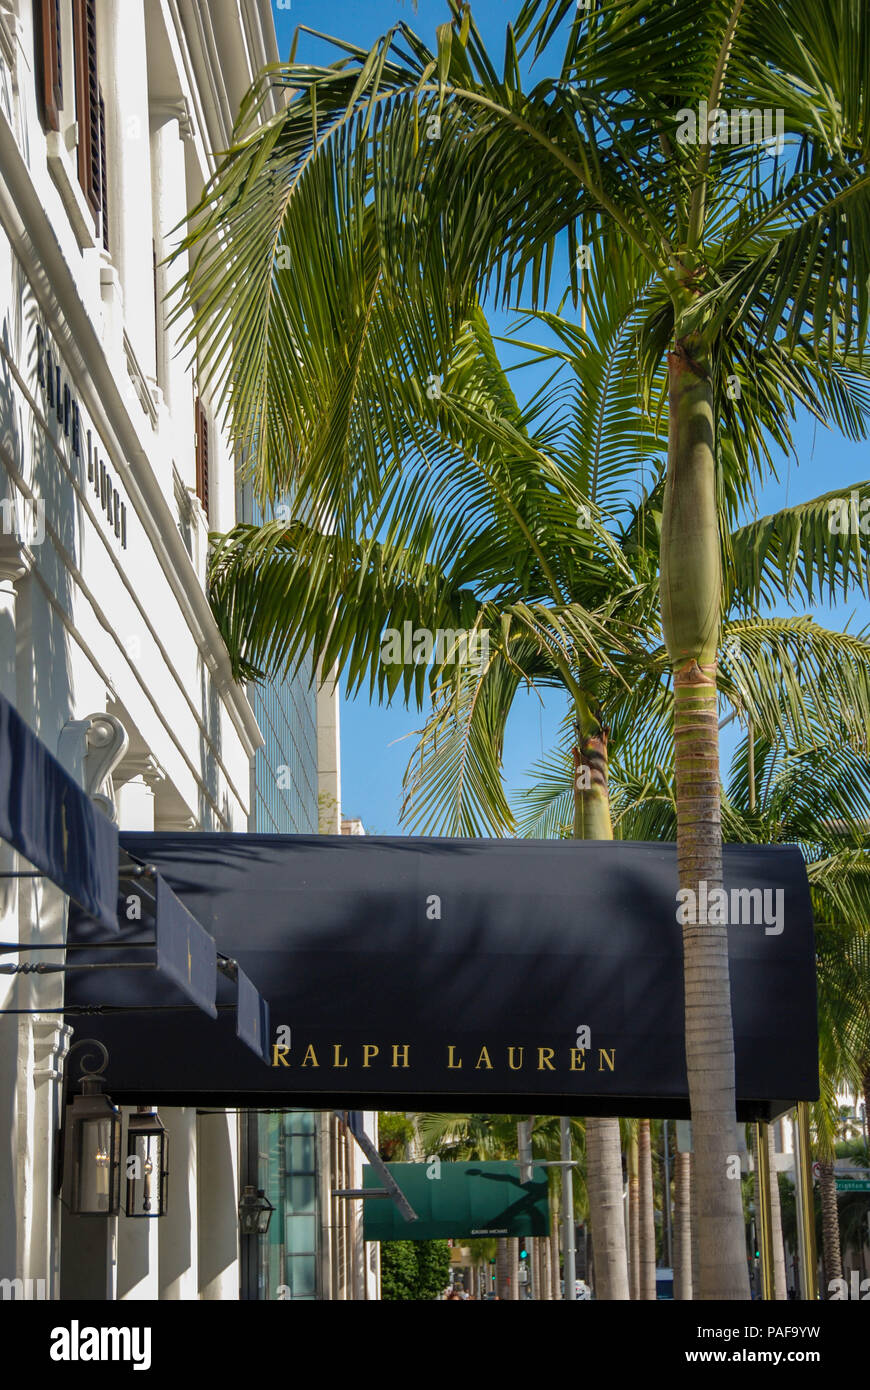 https://c8.alamy.com/comp/PAF9YW/close-up-of-the-canopy-over-the-entrance-to-the-ralph-lauren-designer-store-in-rodeo-drive-beverly-hills-los-angeles-PAF9YW.jpg